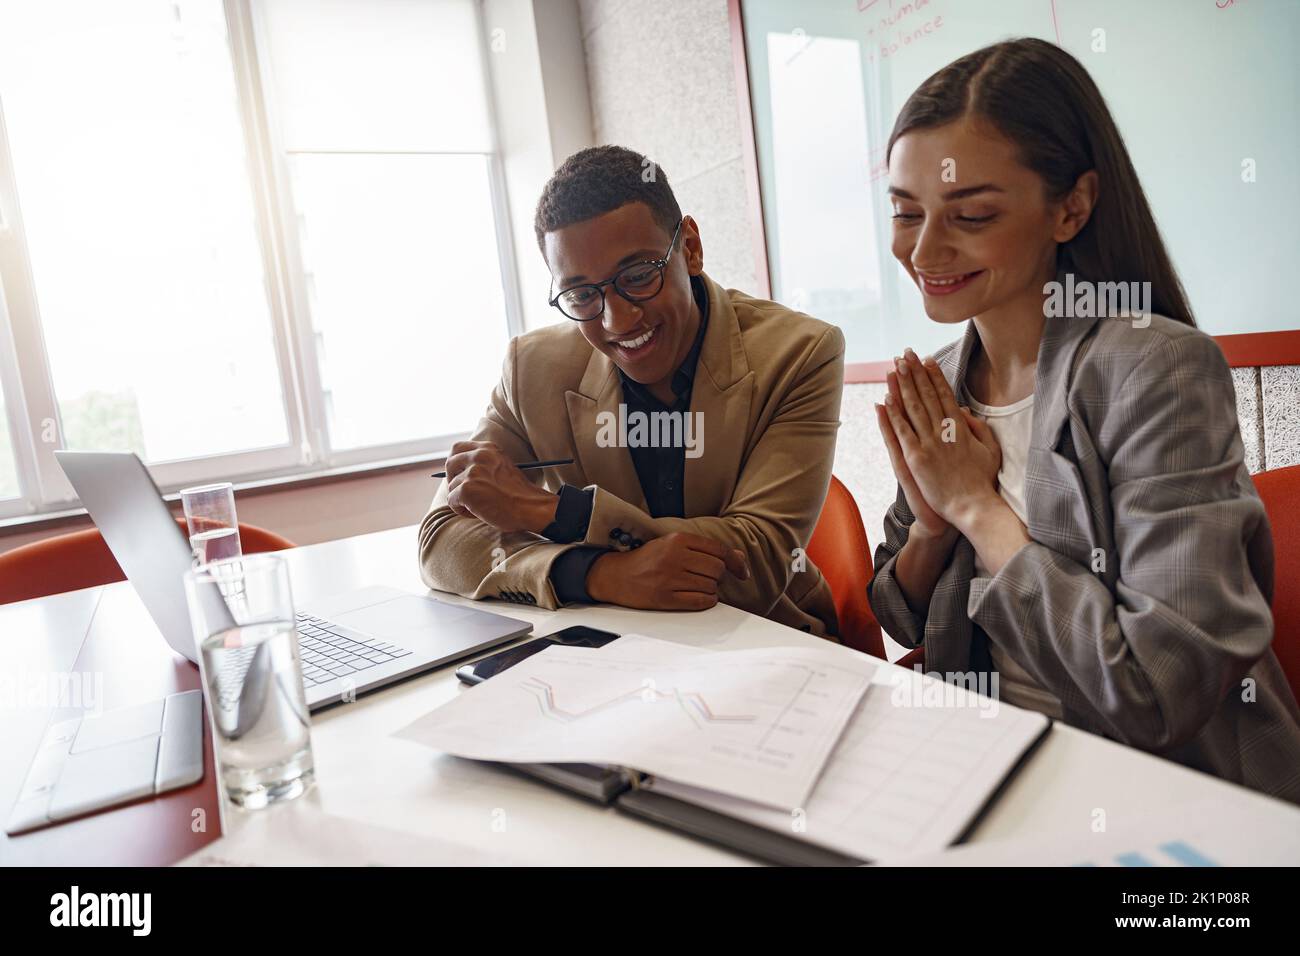 Smiling coworkers cooperating and working together at coworking space, teamwork concept Stock Photo